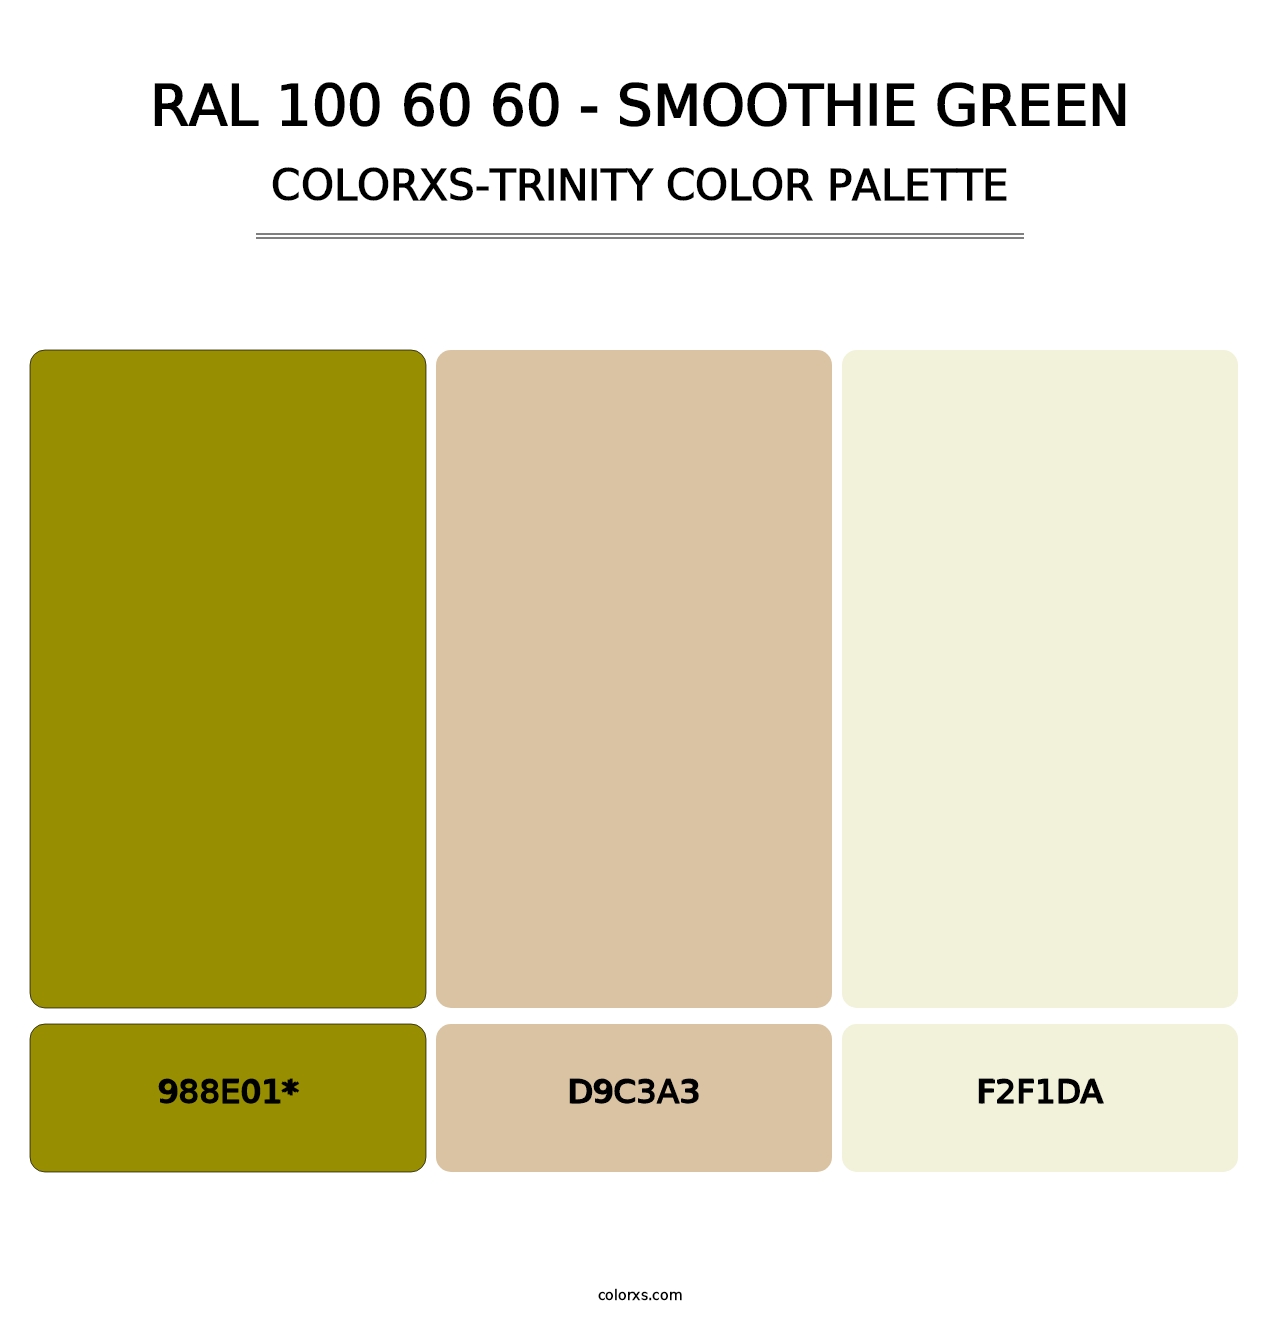 RAL 100 60 60 - Smoothie Green - Colorxs Trinity Palette